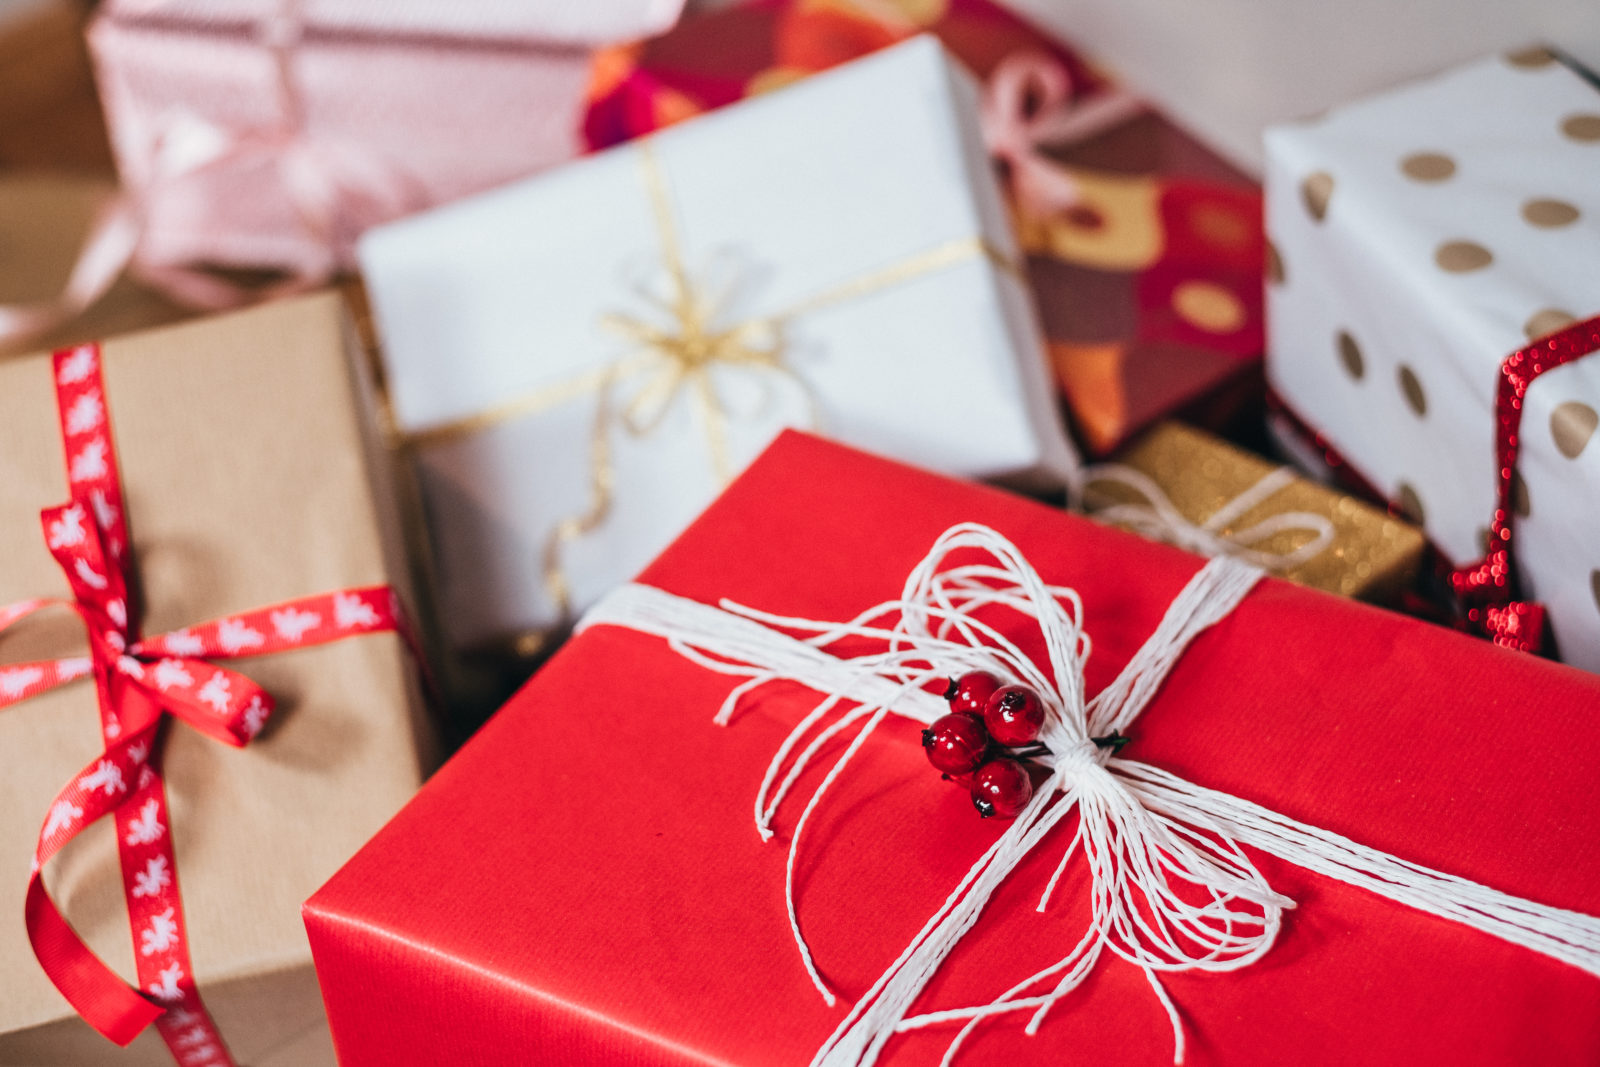 Christmas gifts in red, white, and brown paper with bows